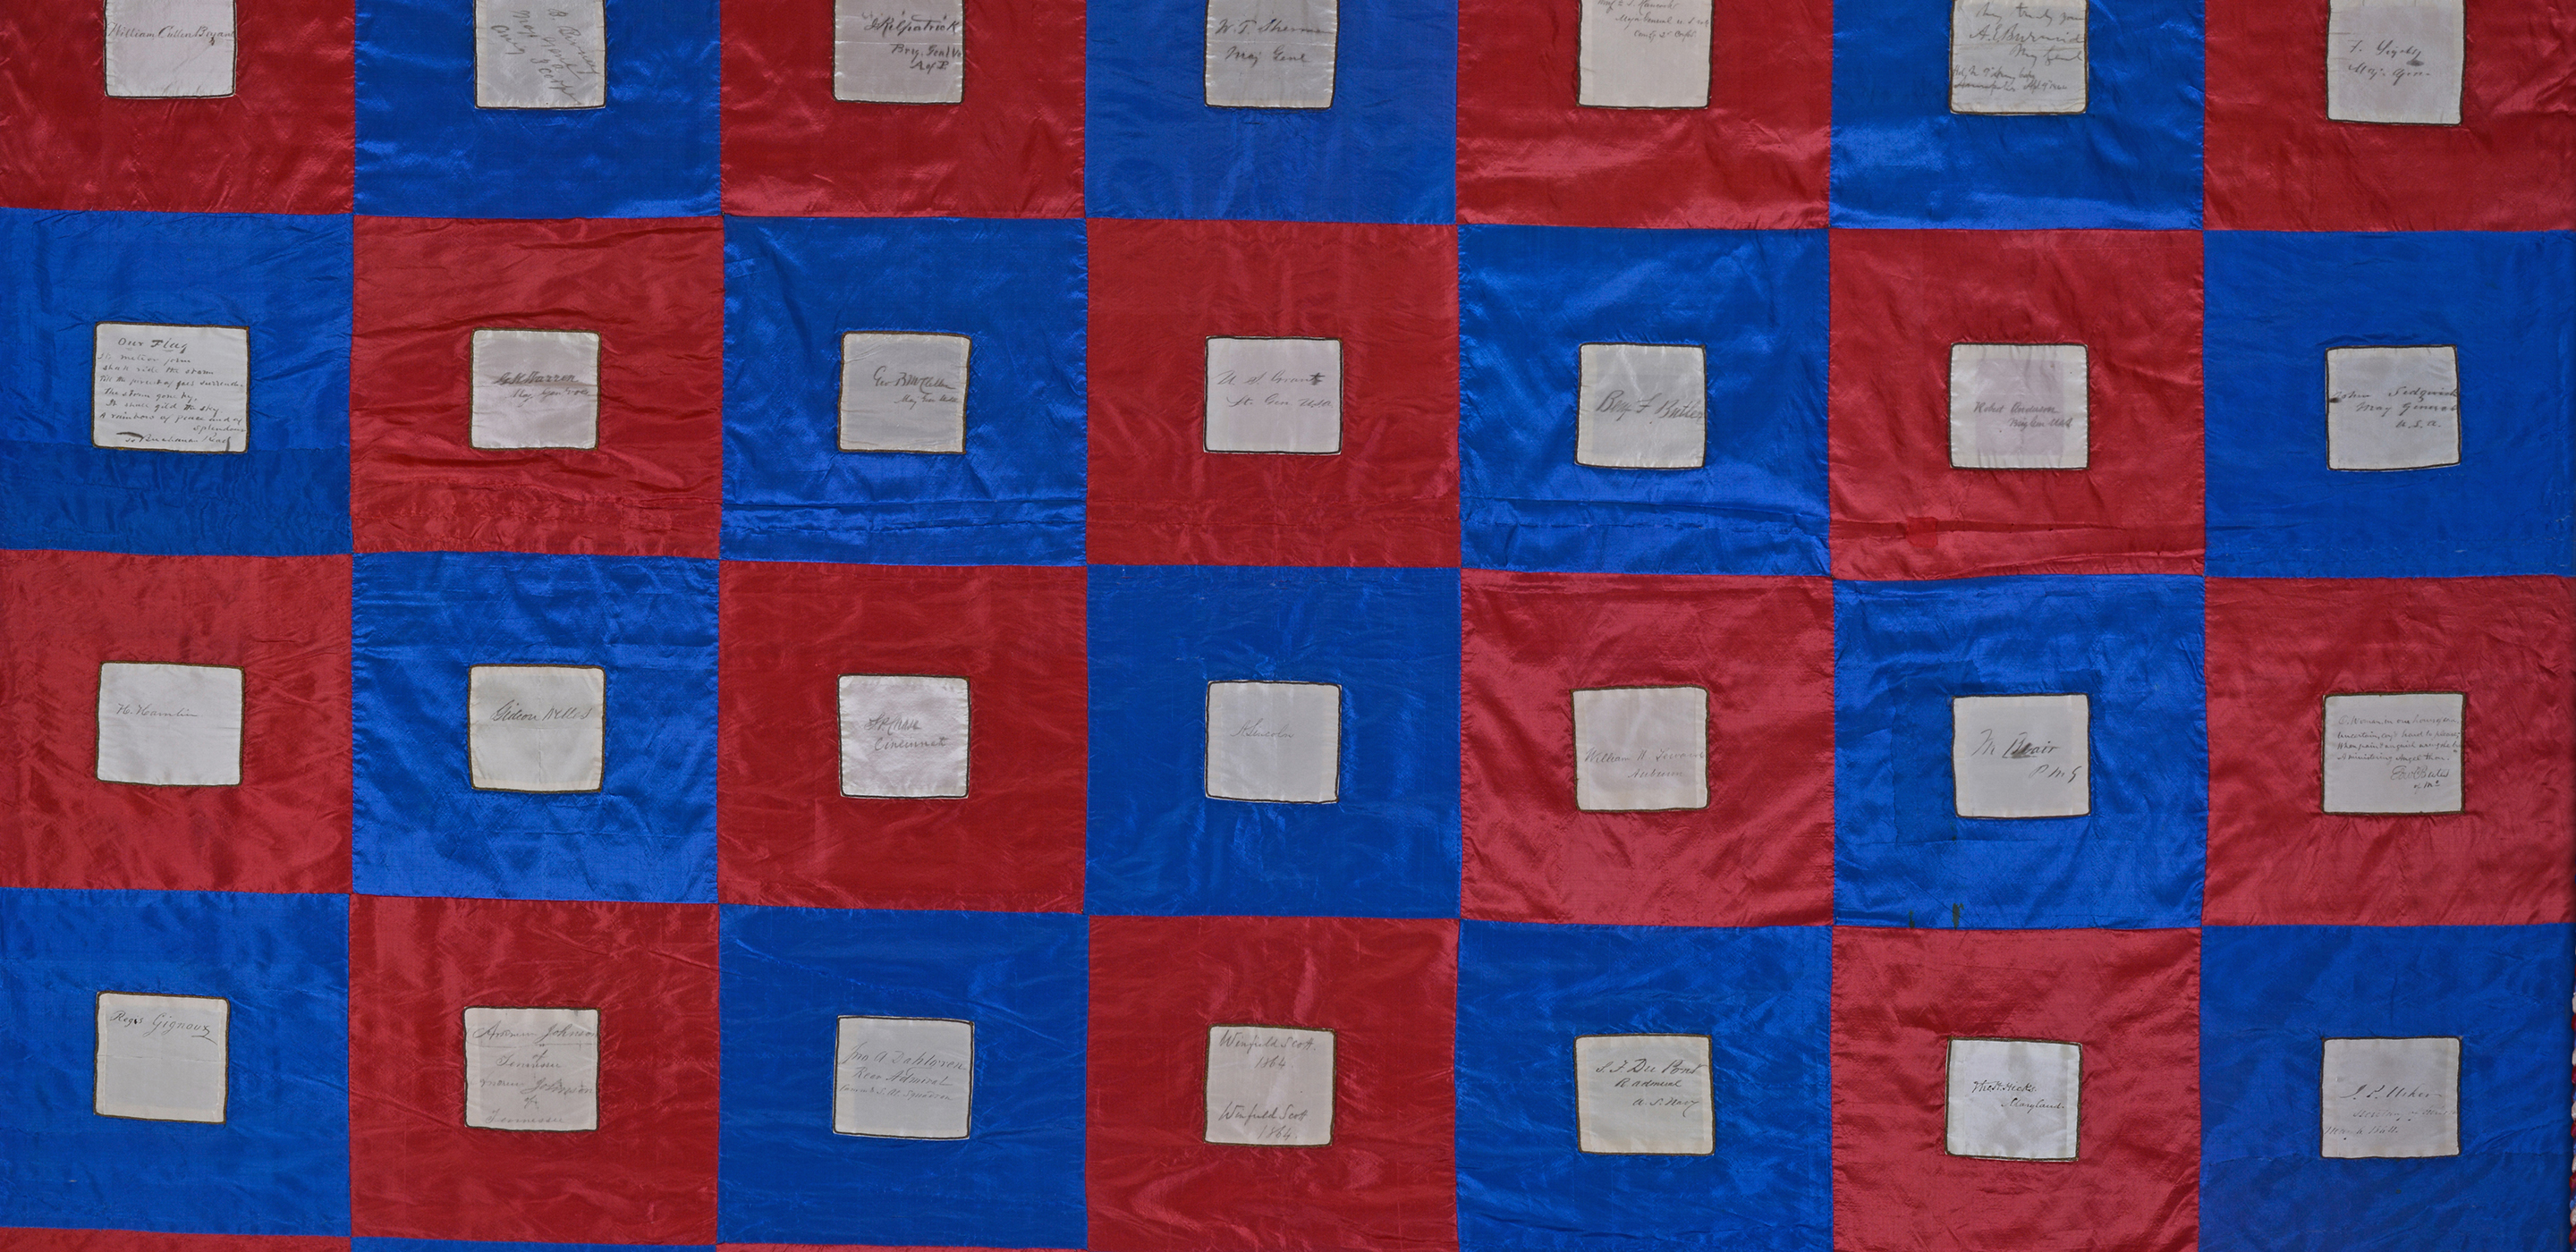 Photograph of a blue and red checkerboard quilt, with a signed piece of cloth sewn into each square.